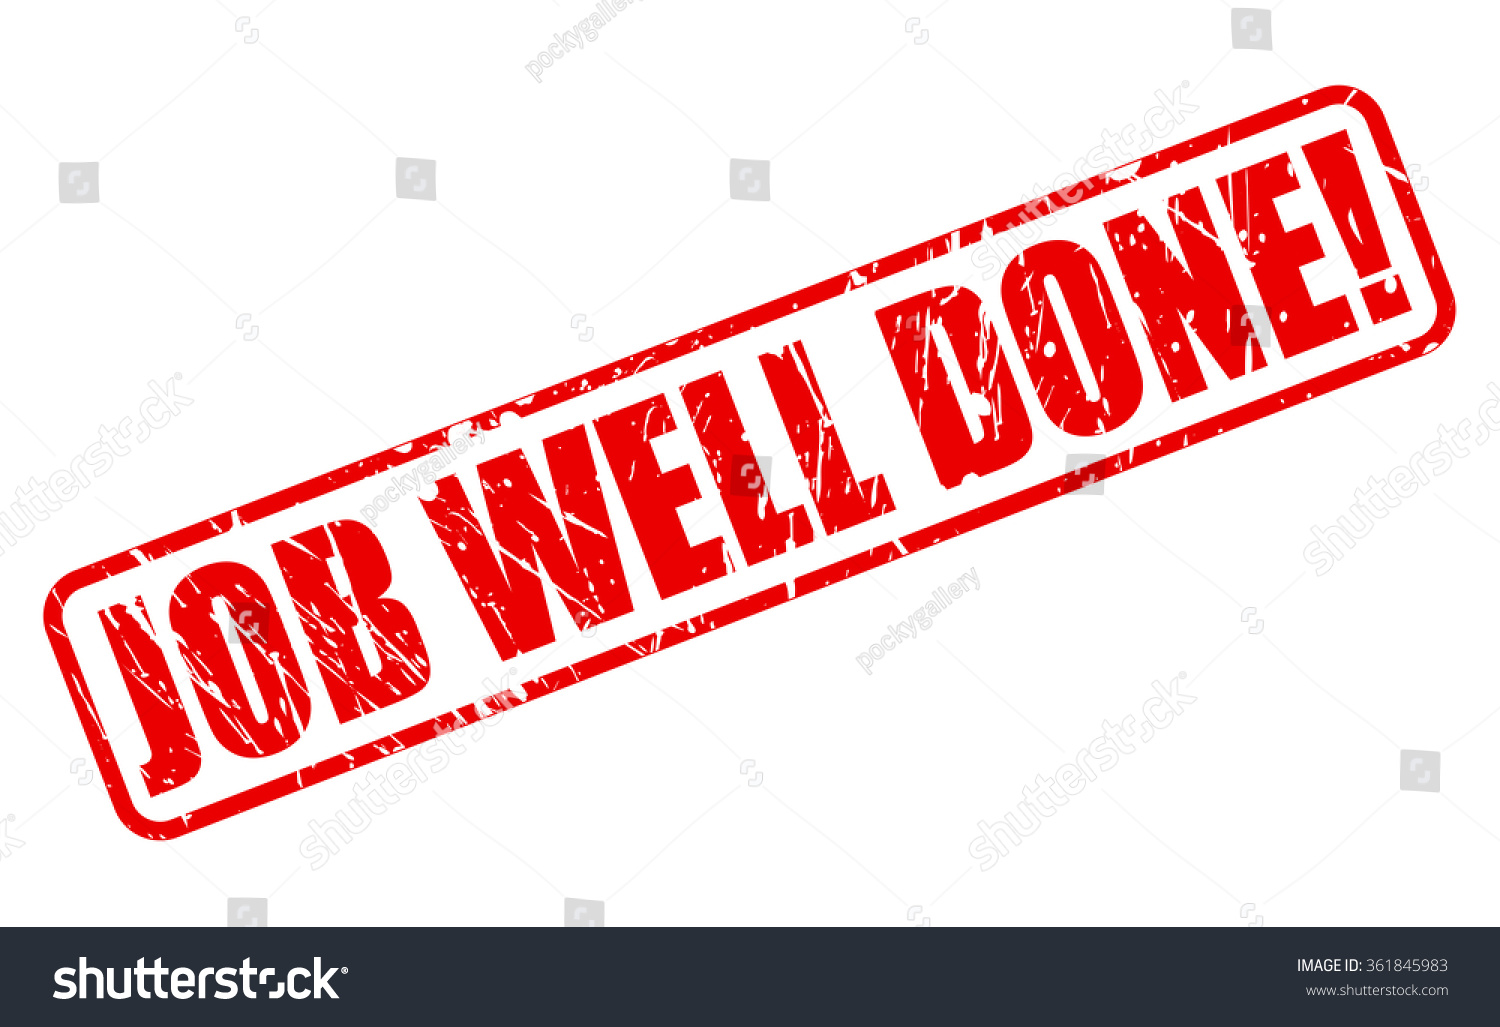 Job Well Done Red Stamp Text On White Stock Vector Illustration ...